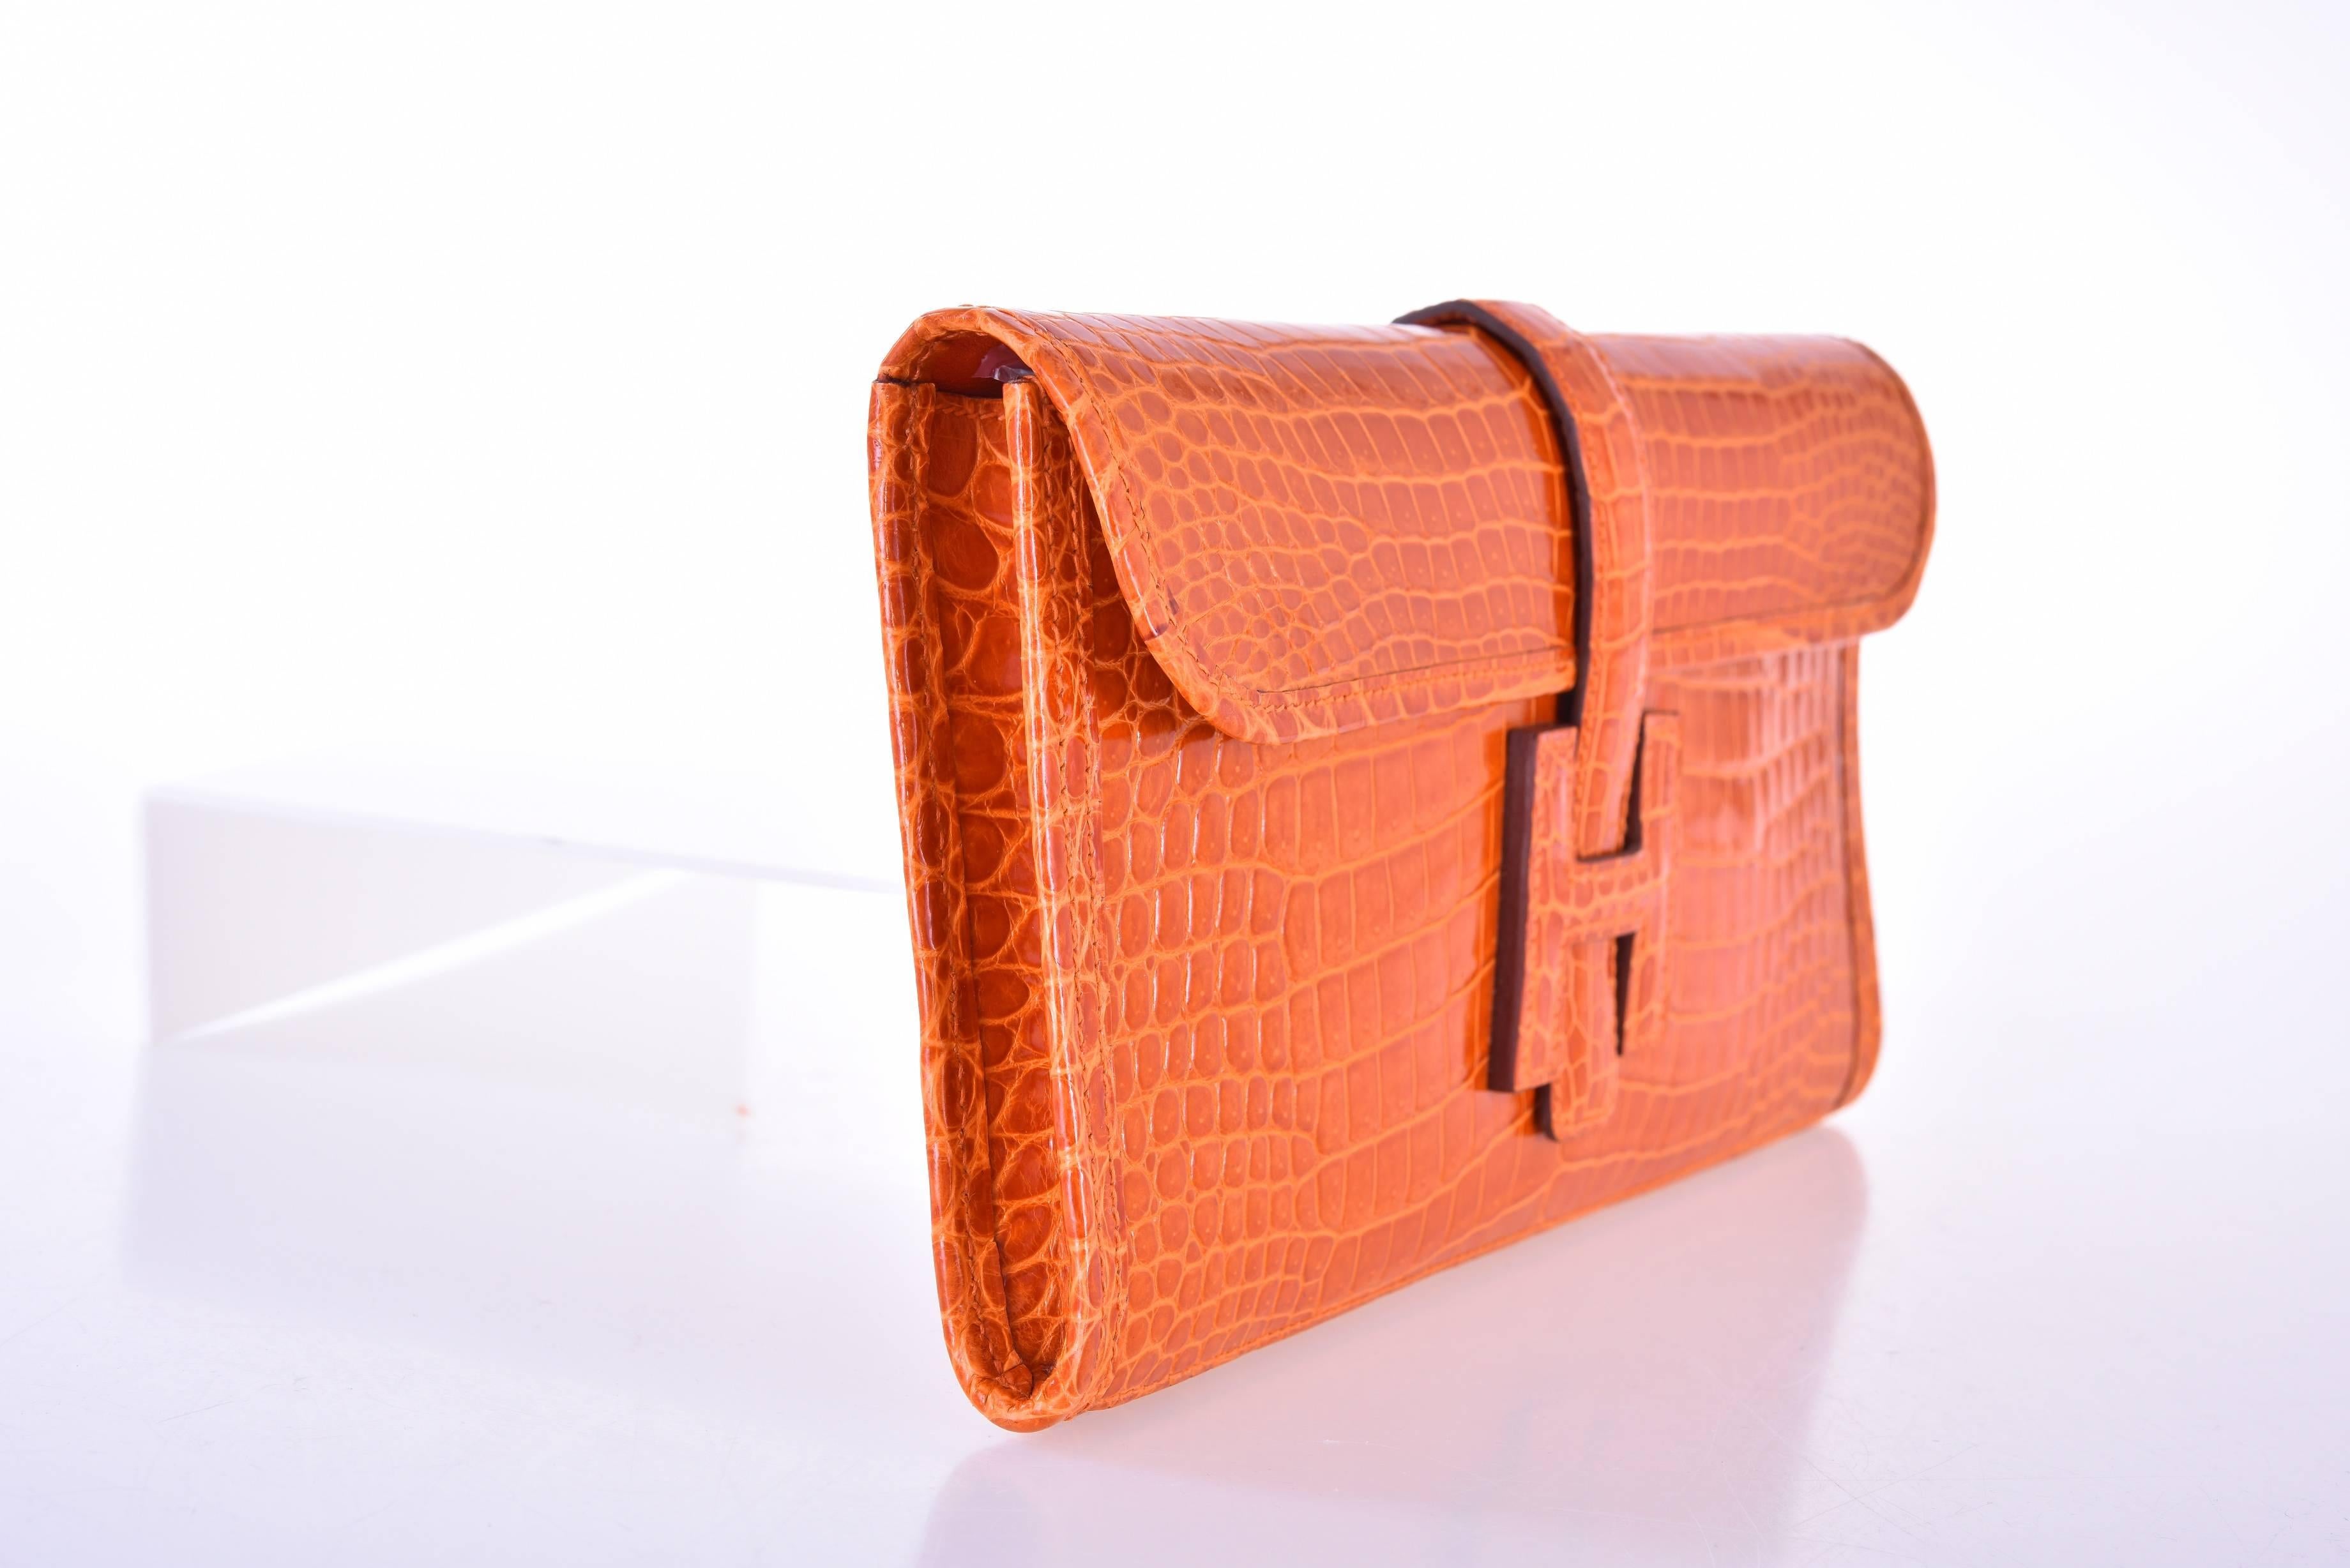 As always, another one of my fab finds! Hermes Jige clutch in  stunning & very rare porosus crocodile. Incredible orange color!
MEASURES:
29CM

This bag is in NEW condition.

**Note: Accessories used for JaneFinds photo shoots are not included